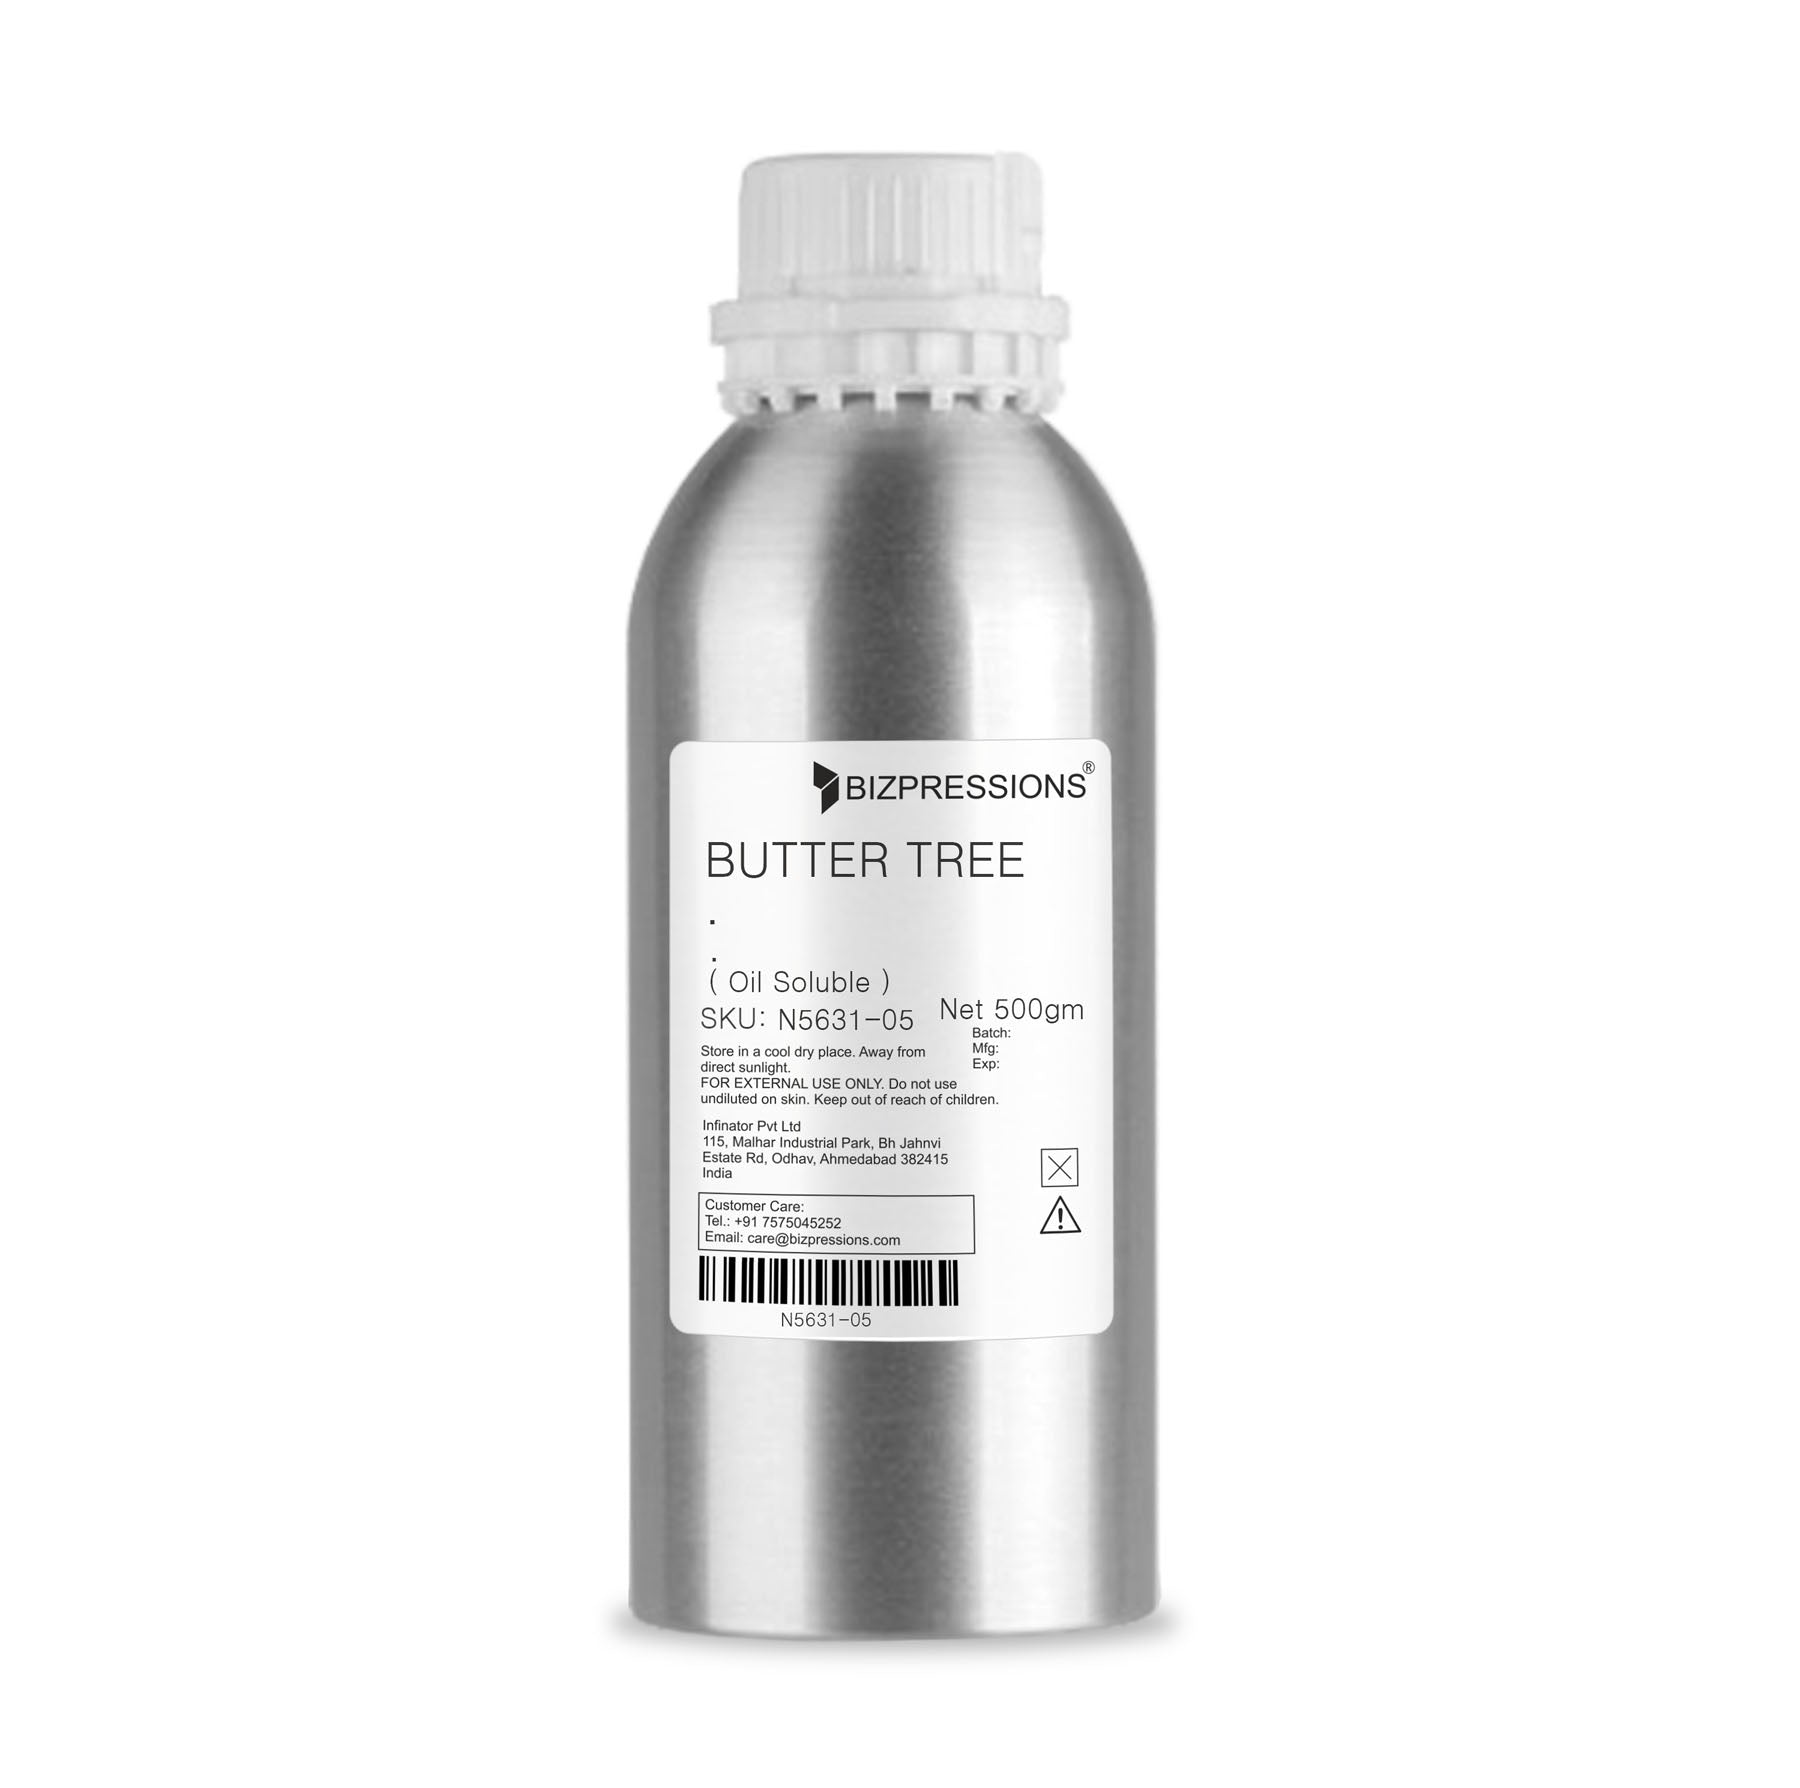 BUTTER TREE - Fragrance ( Oil Soluble ) - 500 gm